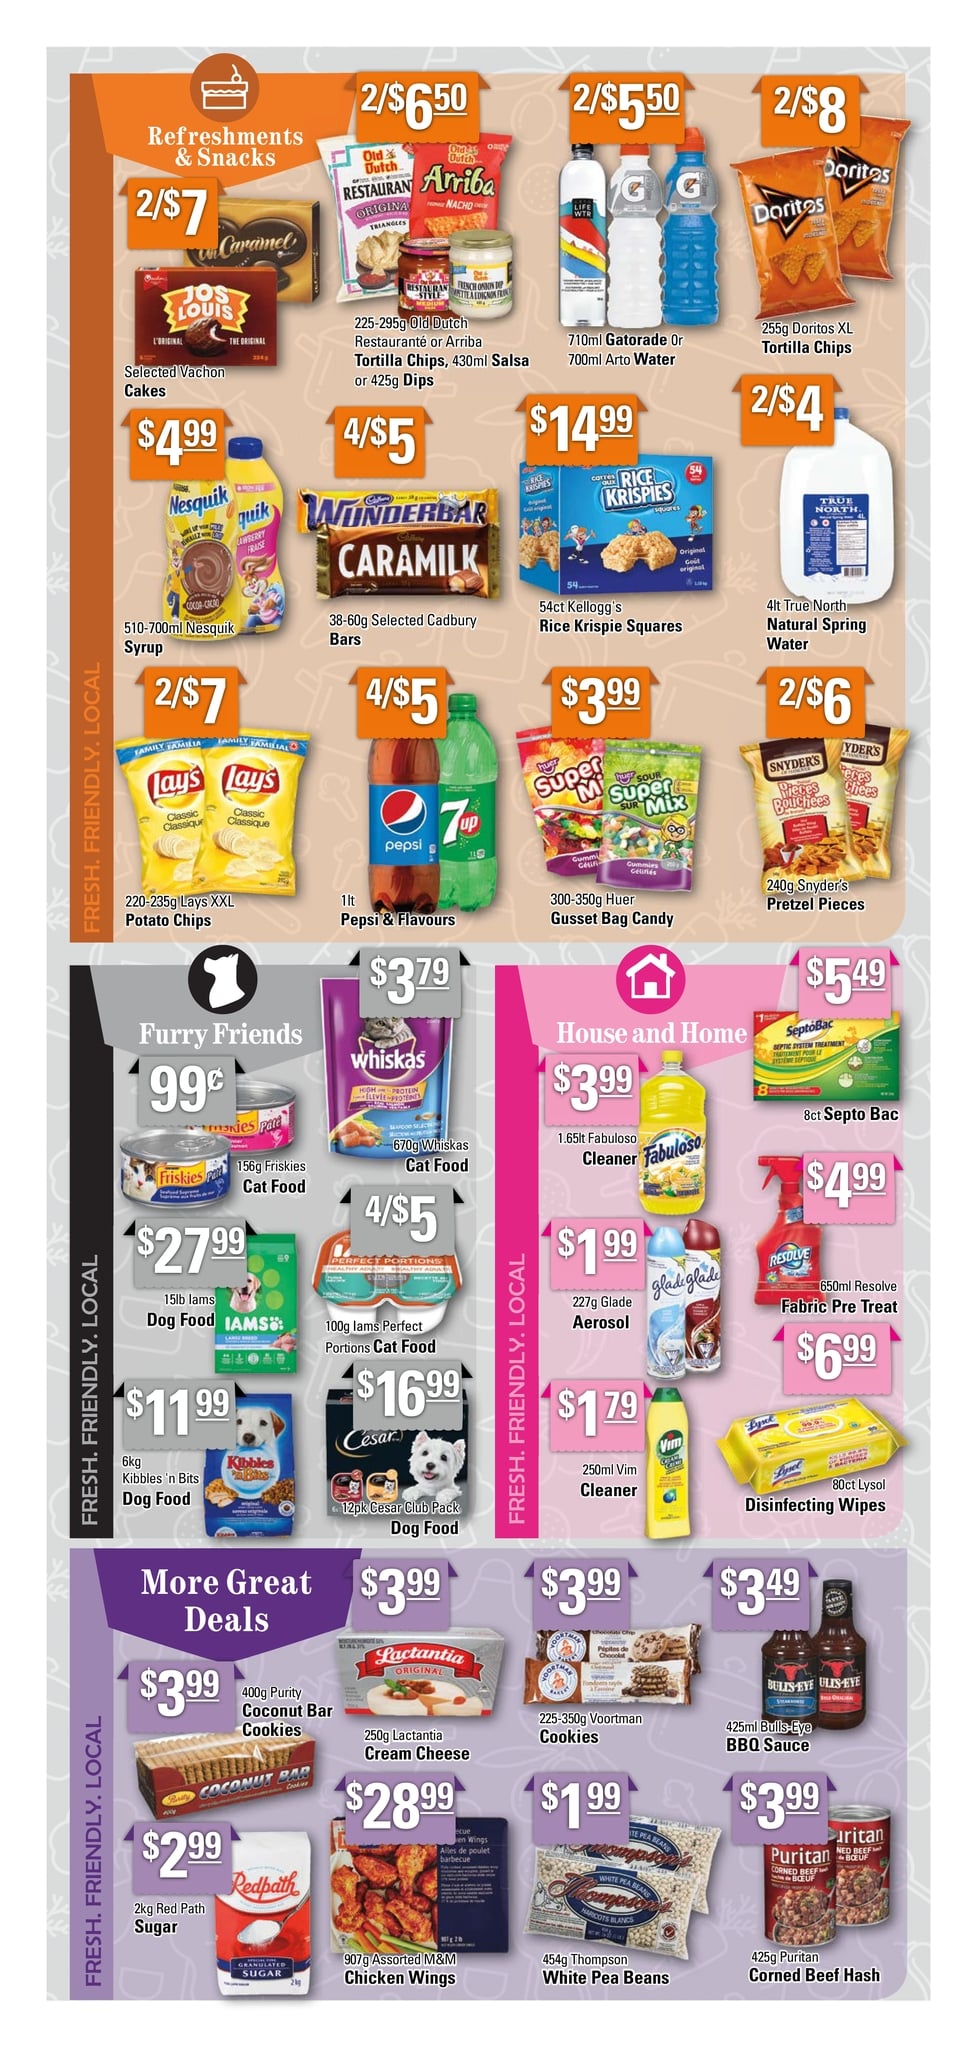 Powell's Supermarket - Weekly Flyer Specials - Page 7